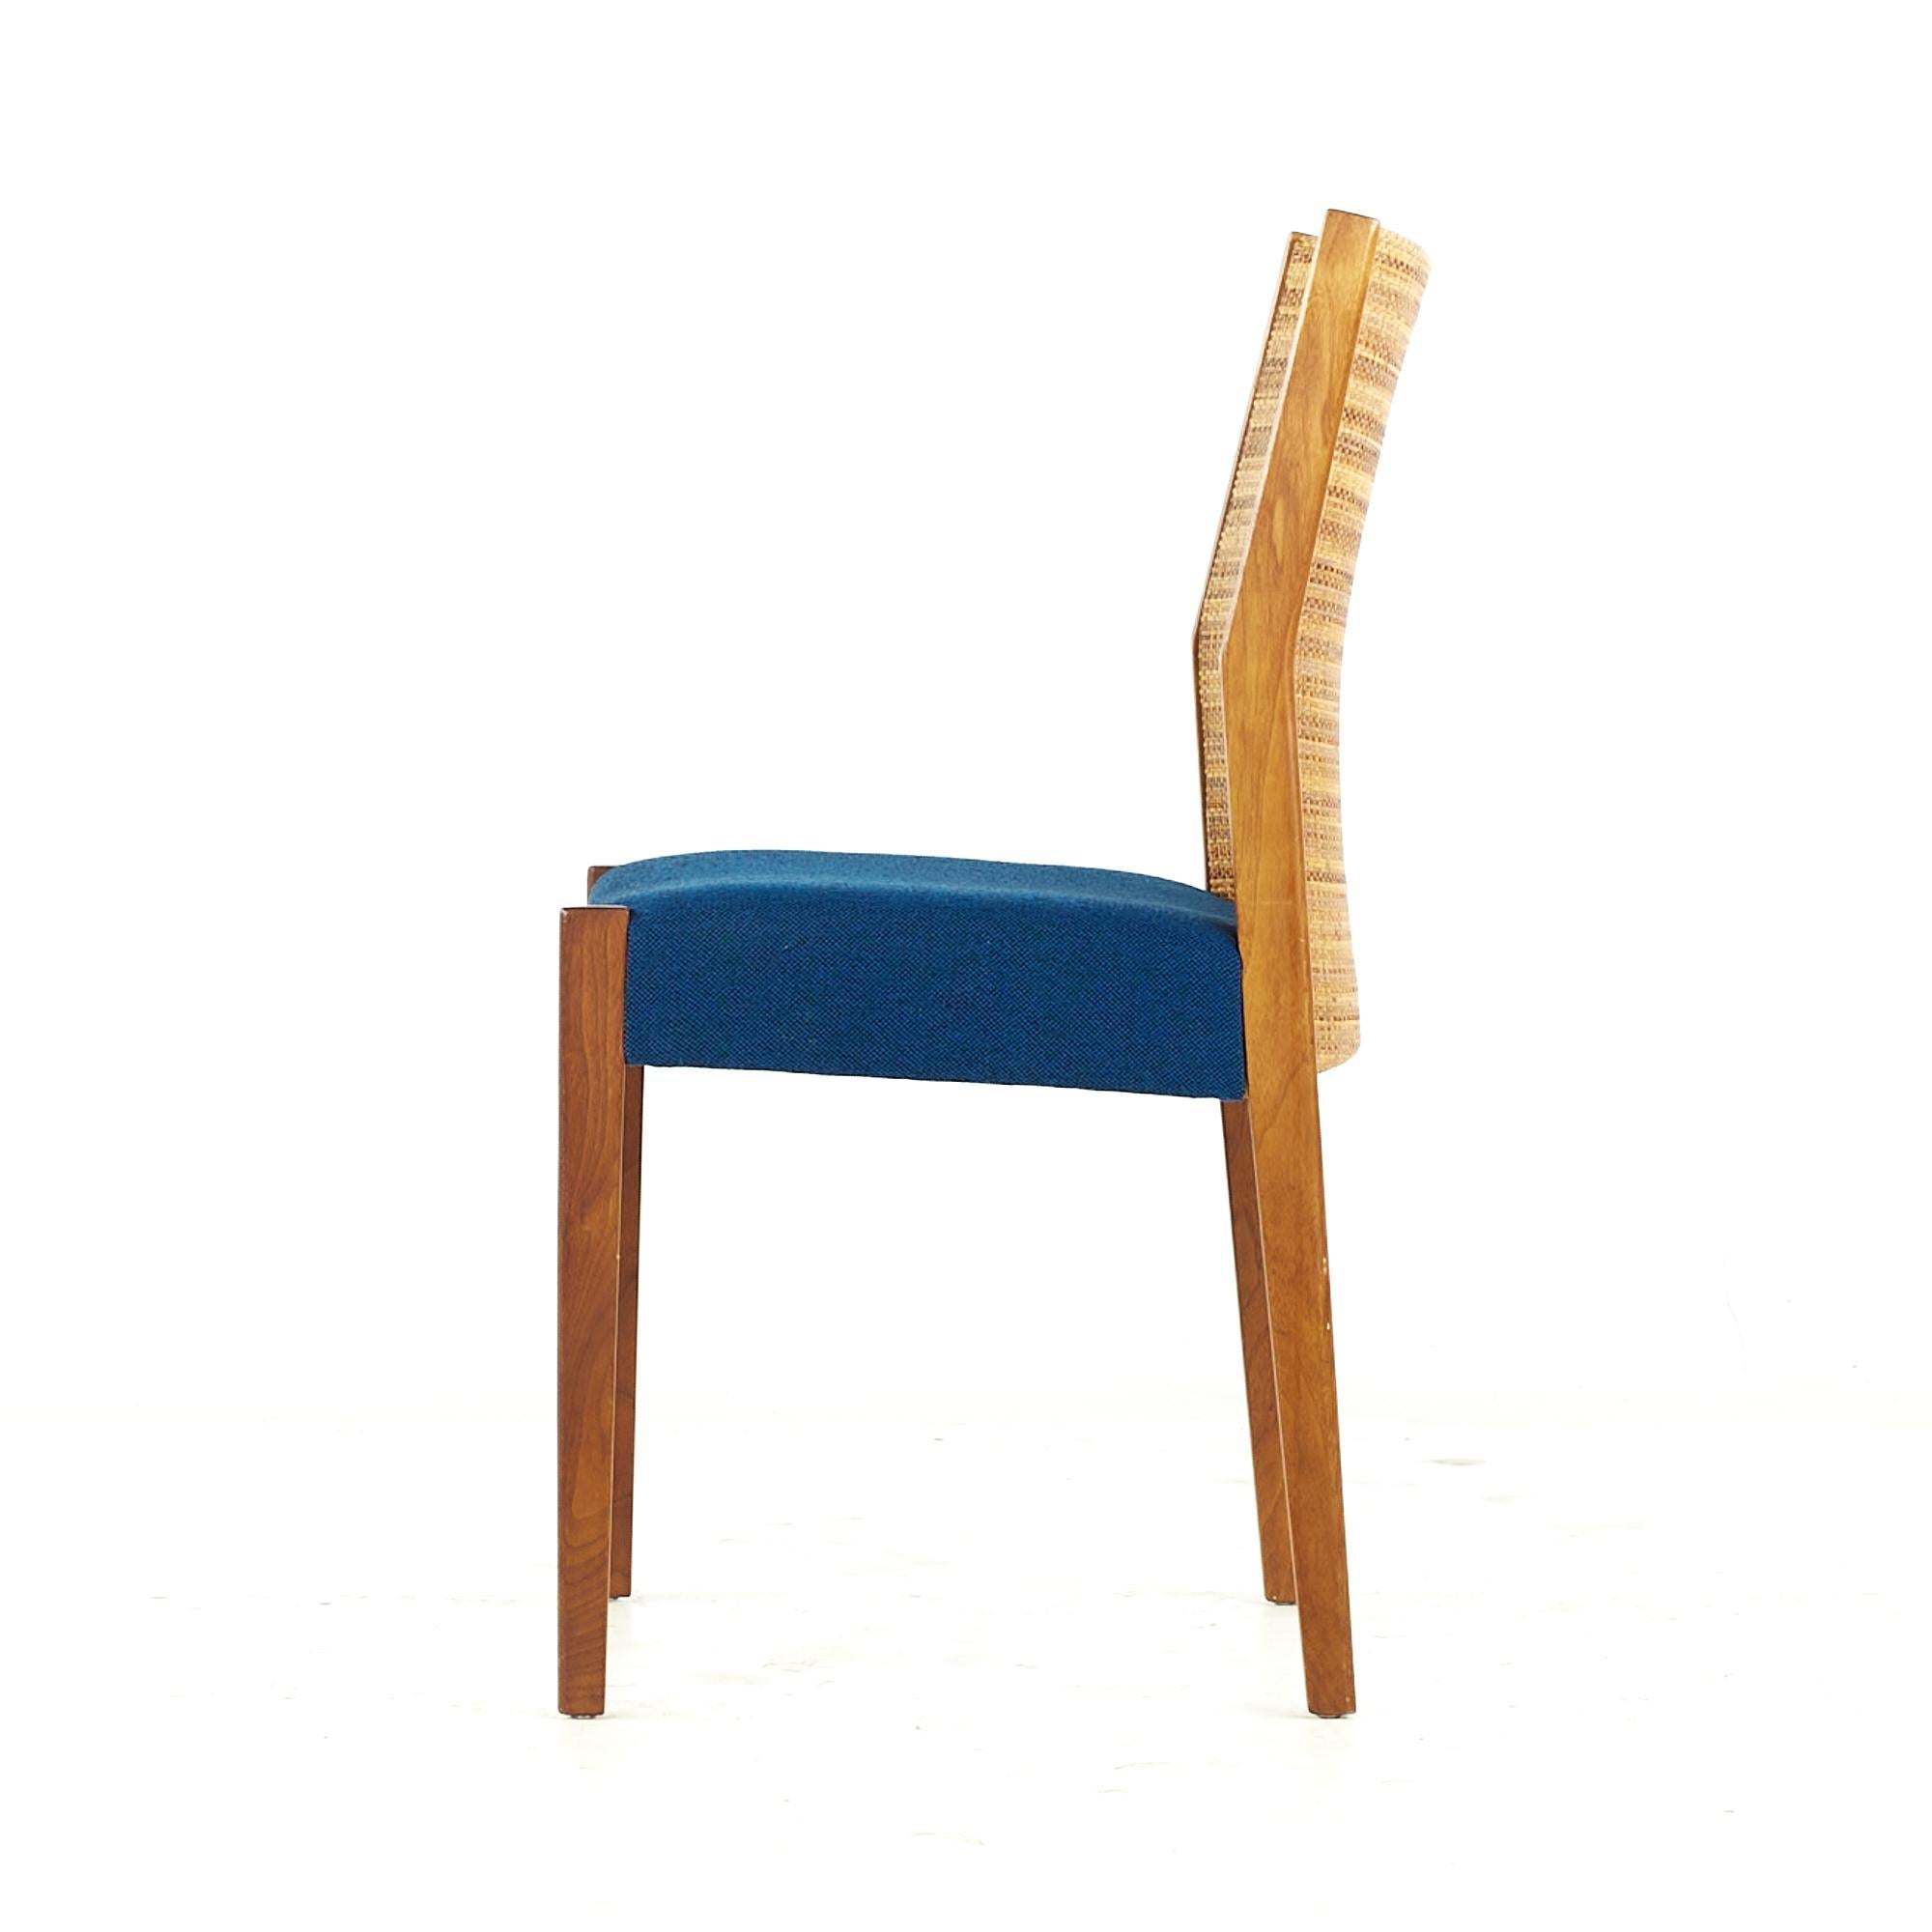 Jens Risom Midcentury Cane and Walnut Dining Chairs, Set of 6 For Sale 2